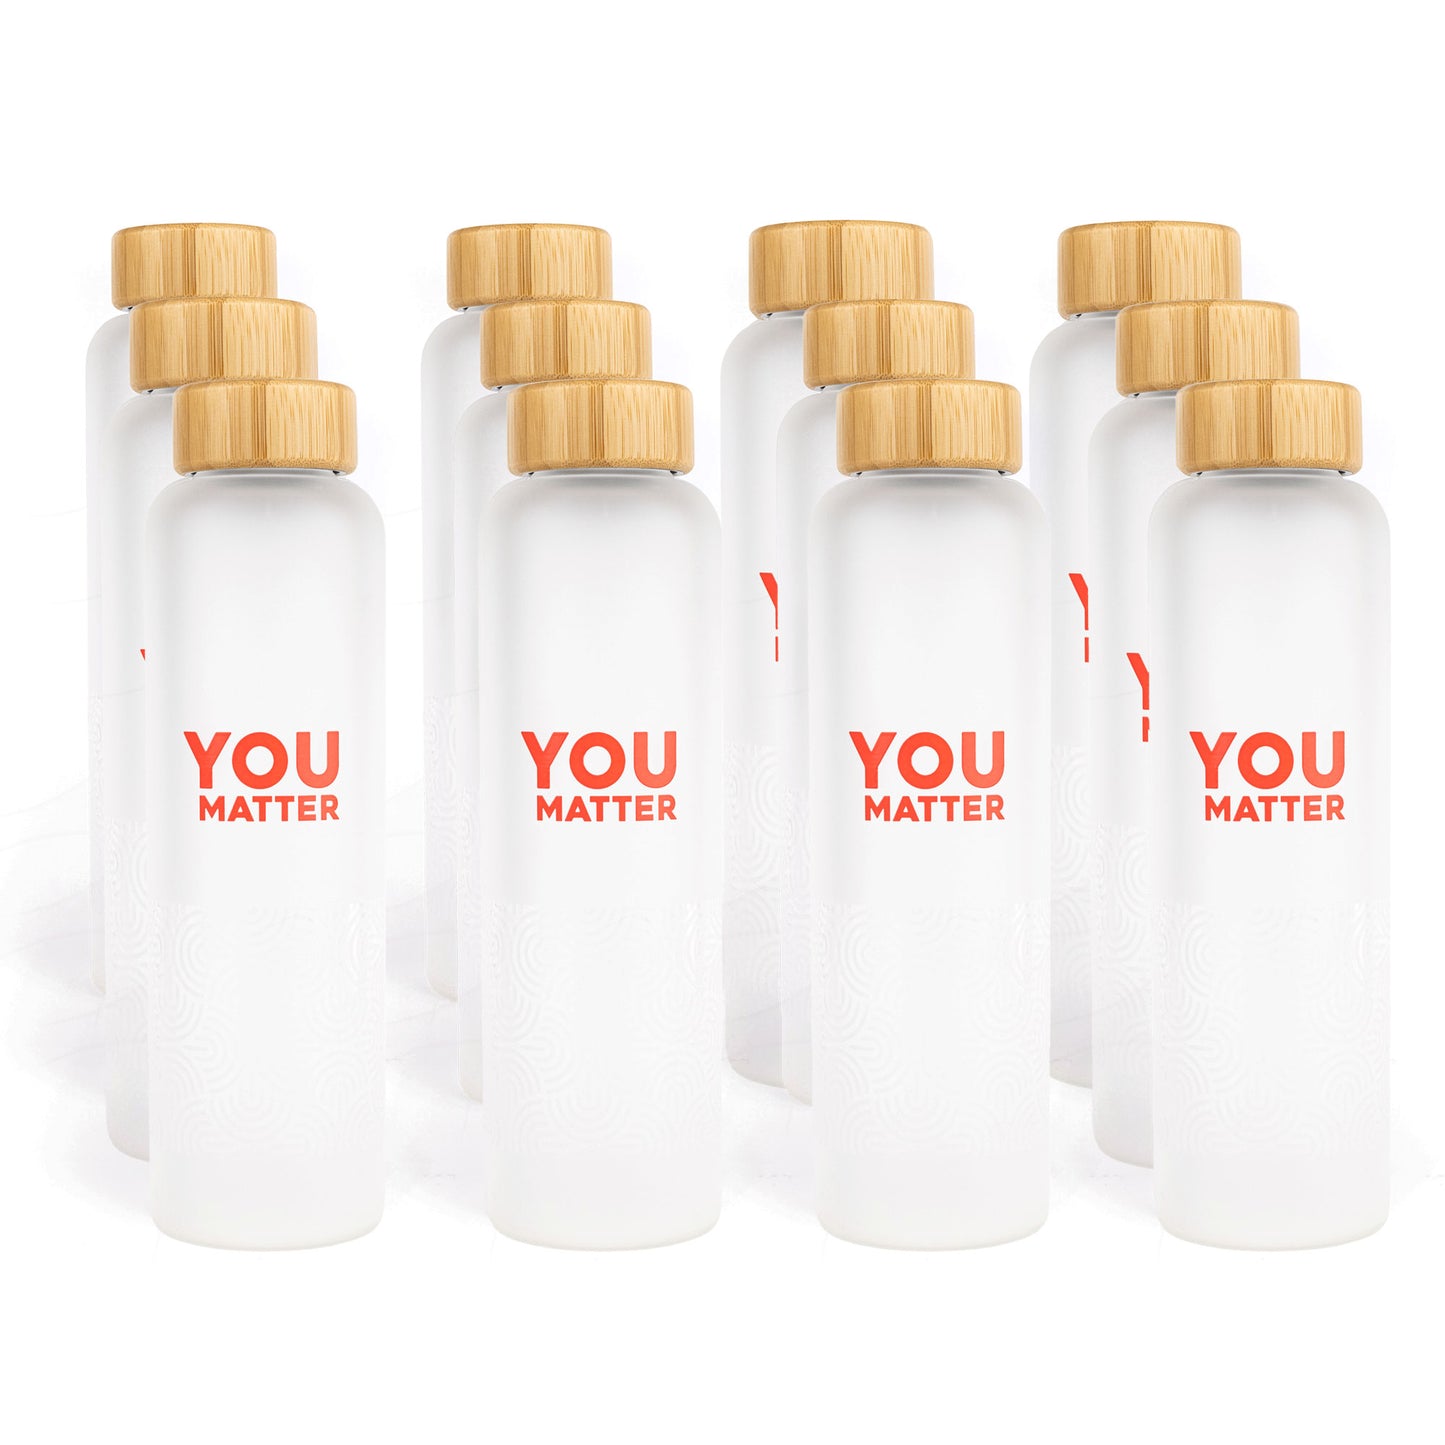 One Act "You Matter" 12-Bottle Case